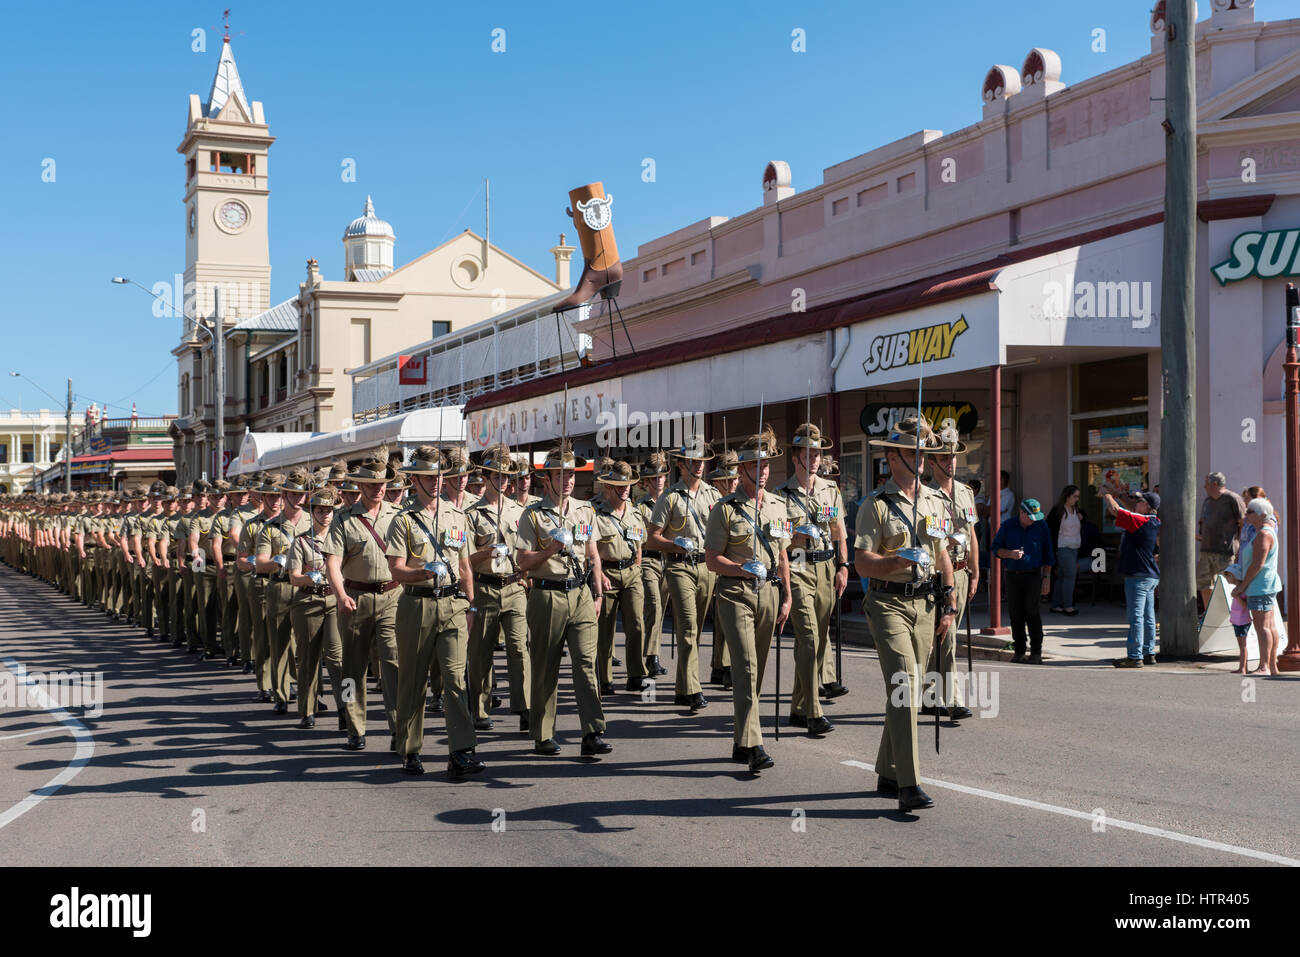 Charters Towers, Australia - April 25, 2016: Soldiers marching on Anzac Day in Charters Towers, Queensland Australia Stock Photo